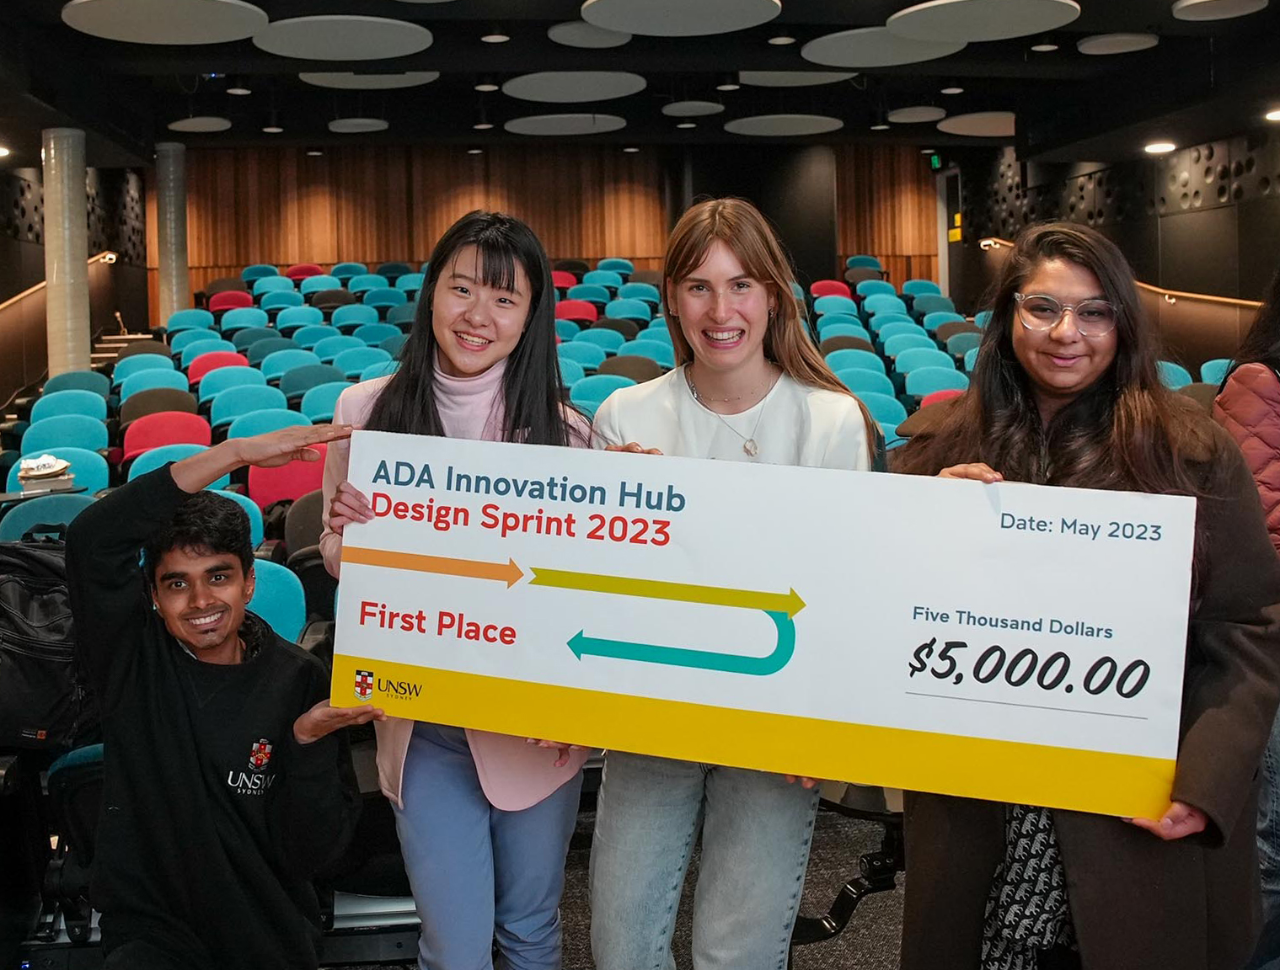 First place winning team from ADA Innovation Hub Design Sprint 2023 hold giant novelty cheque